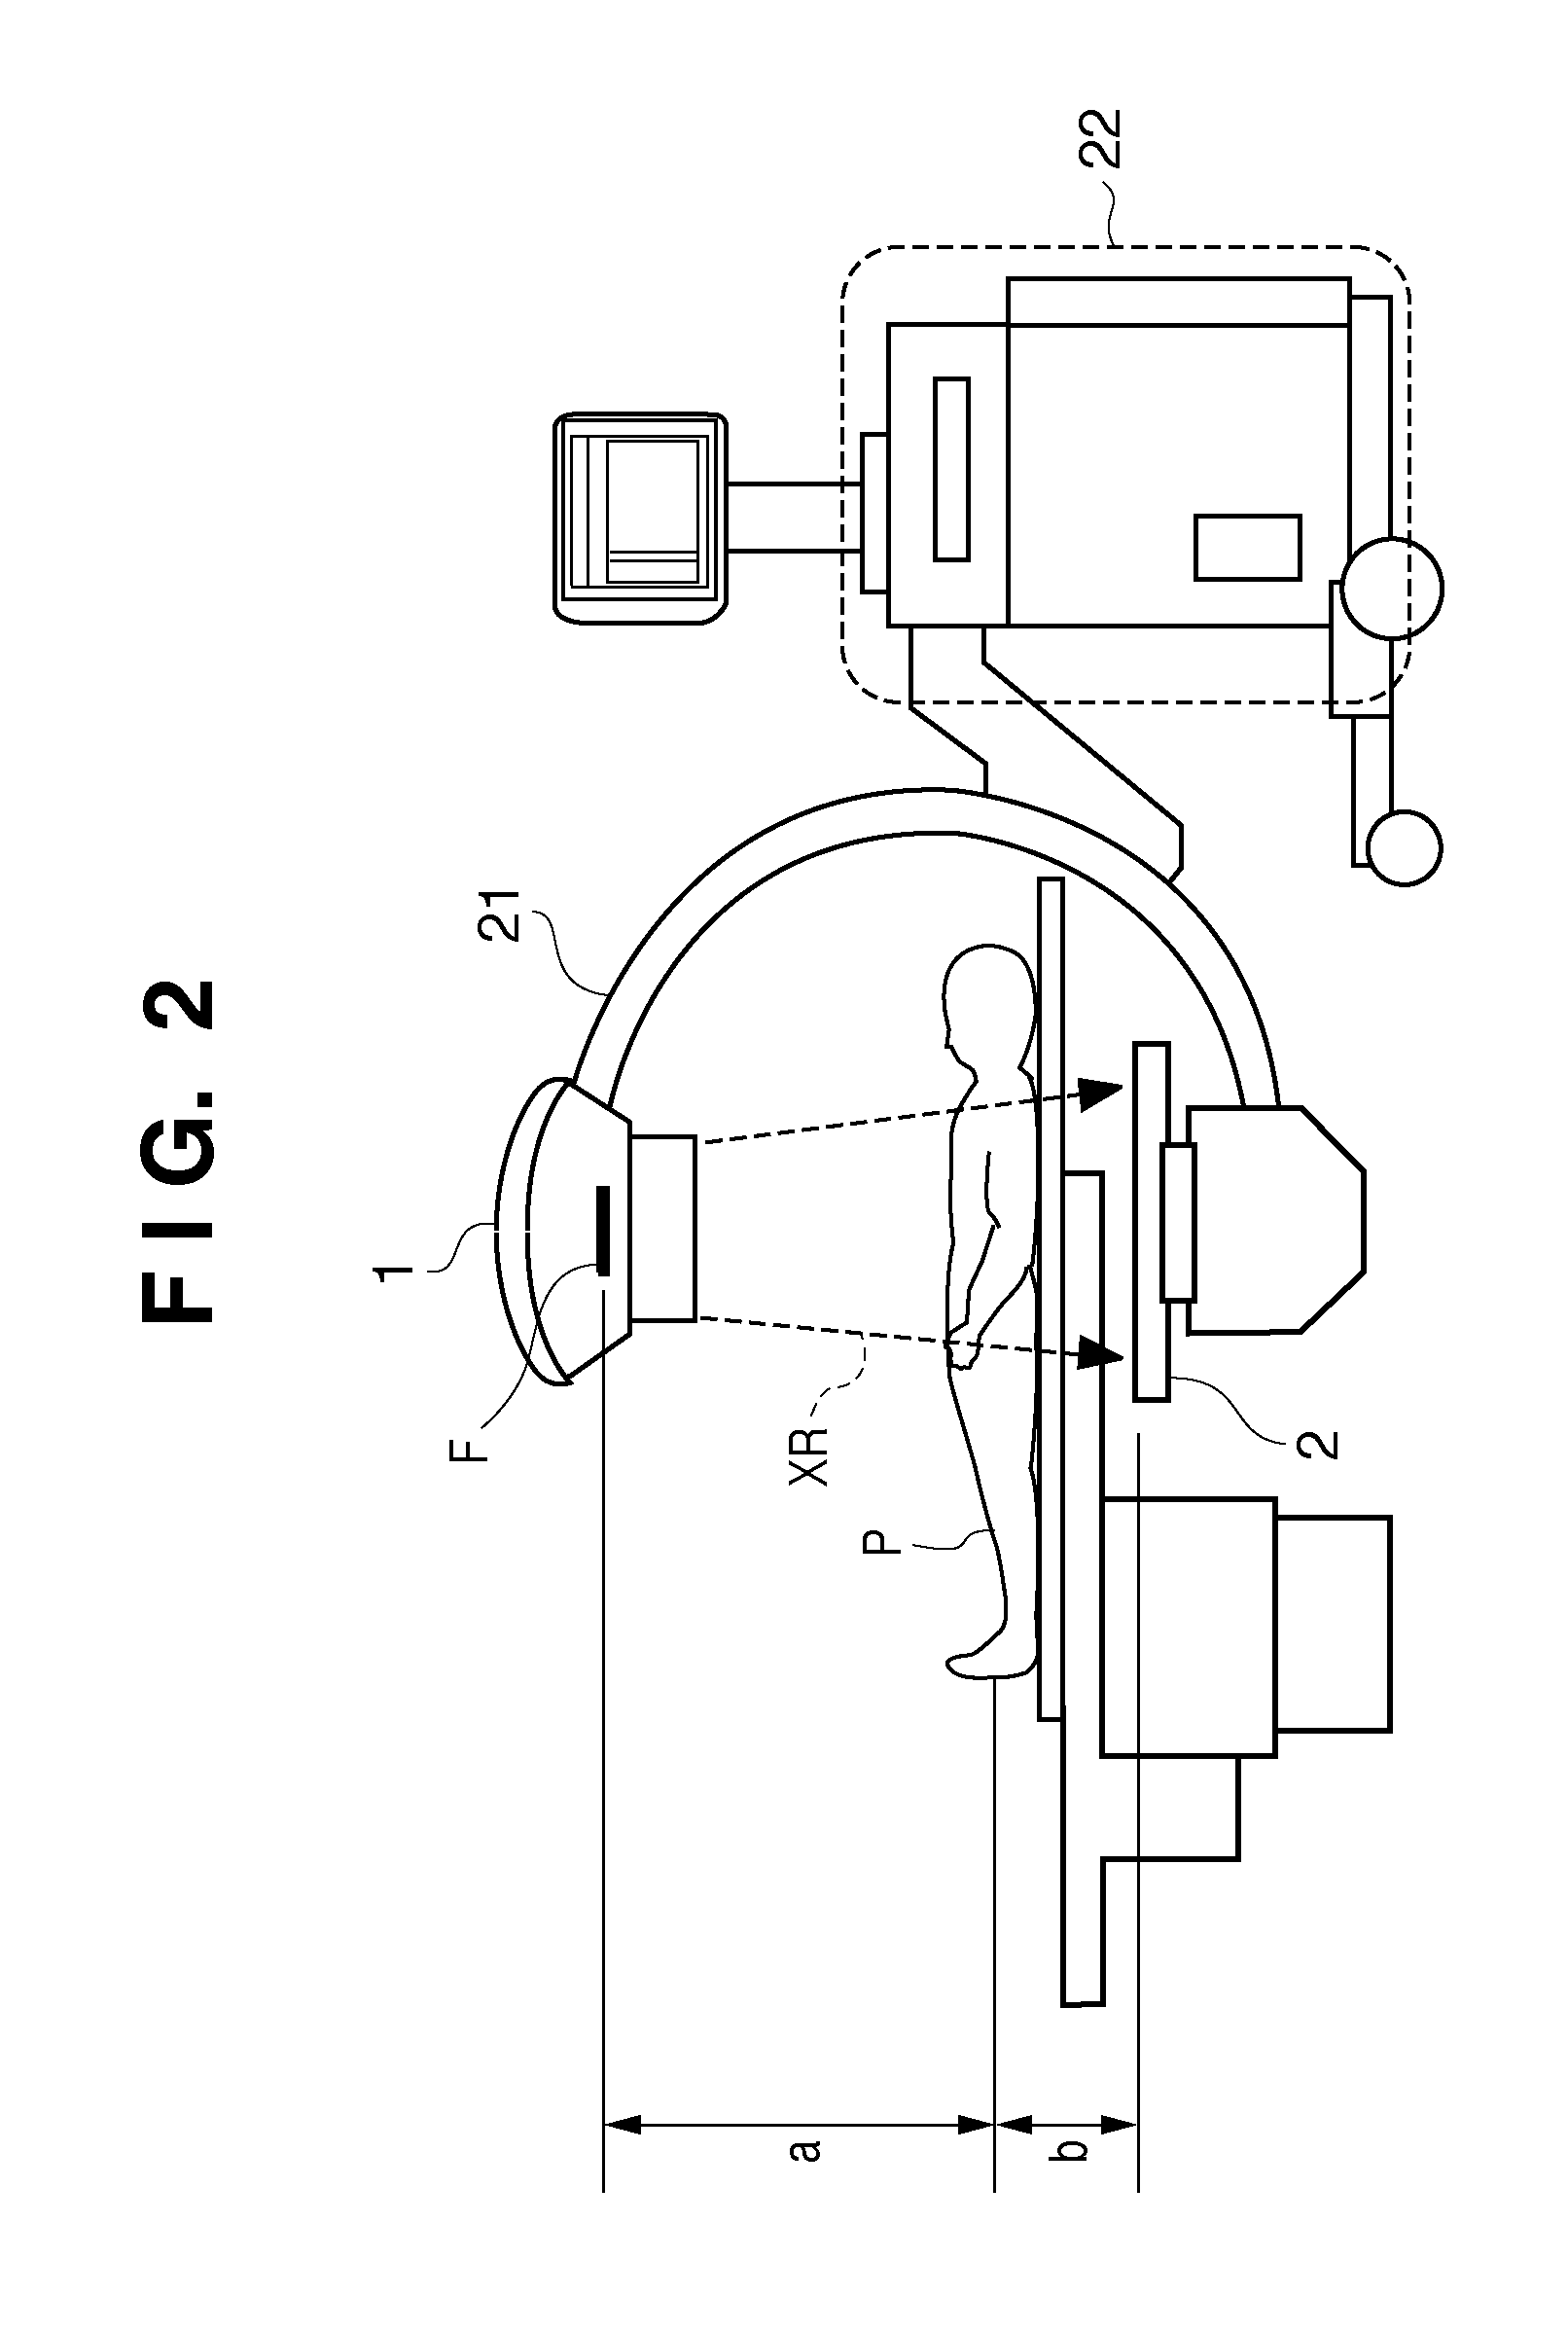 X-ray generator, X-ray imaging apparatus, and control methods therefor